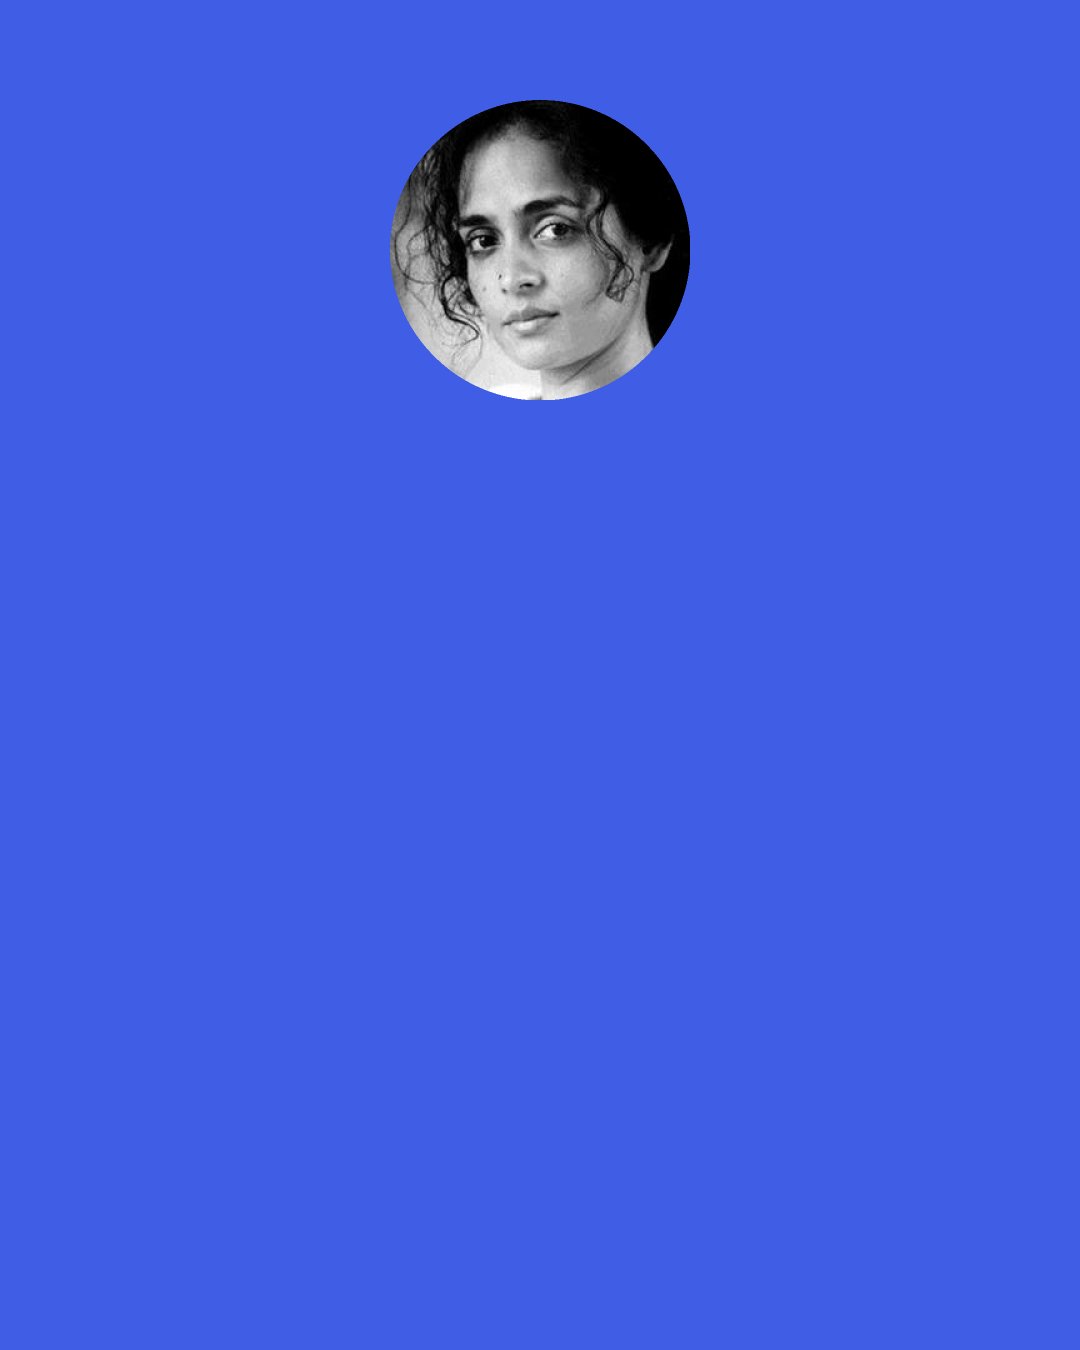 Arundhati Roy: Anyway, what is a country? When people say, "Tell me about India," I say, "Which India?.... The land of poetry and mad rebellion? The one that produces haunting music and exquisite textiles? The one that invented the caste system and celebrates the genocide of Muslims and Sikhs and the lynching of Dalits? The country of dollar billionaires? Or the one in which 800 million live on less than half-a-dollar a day? Which India?"